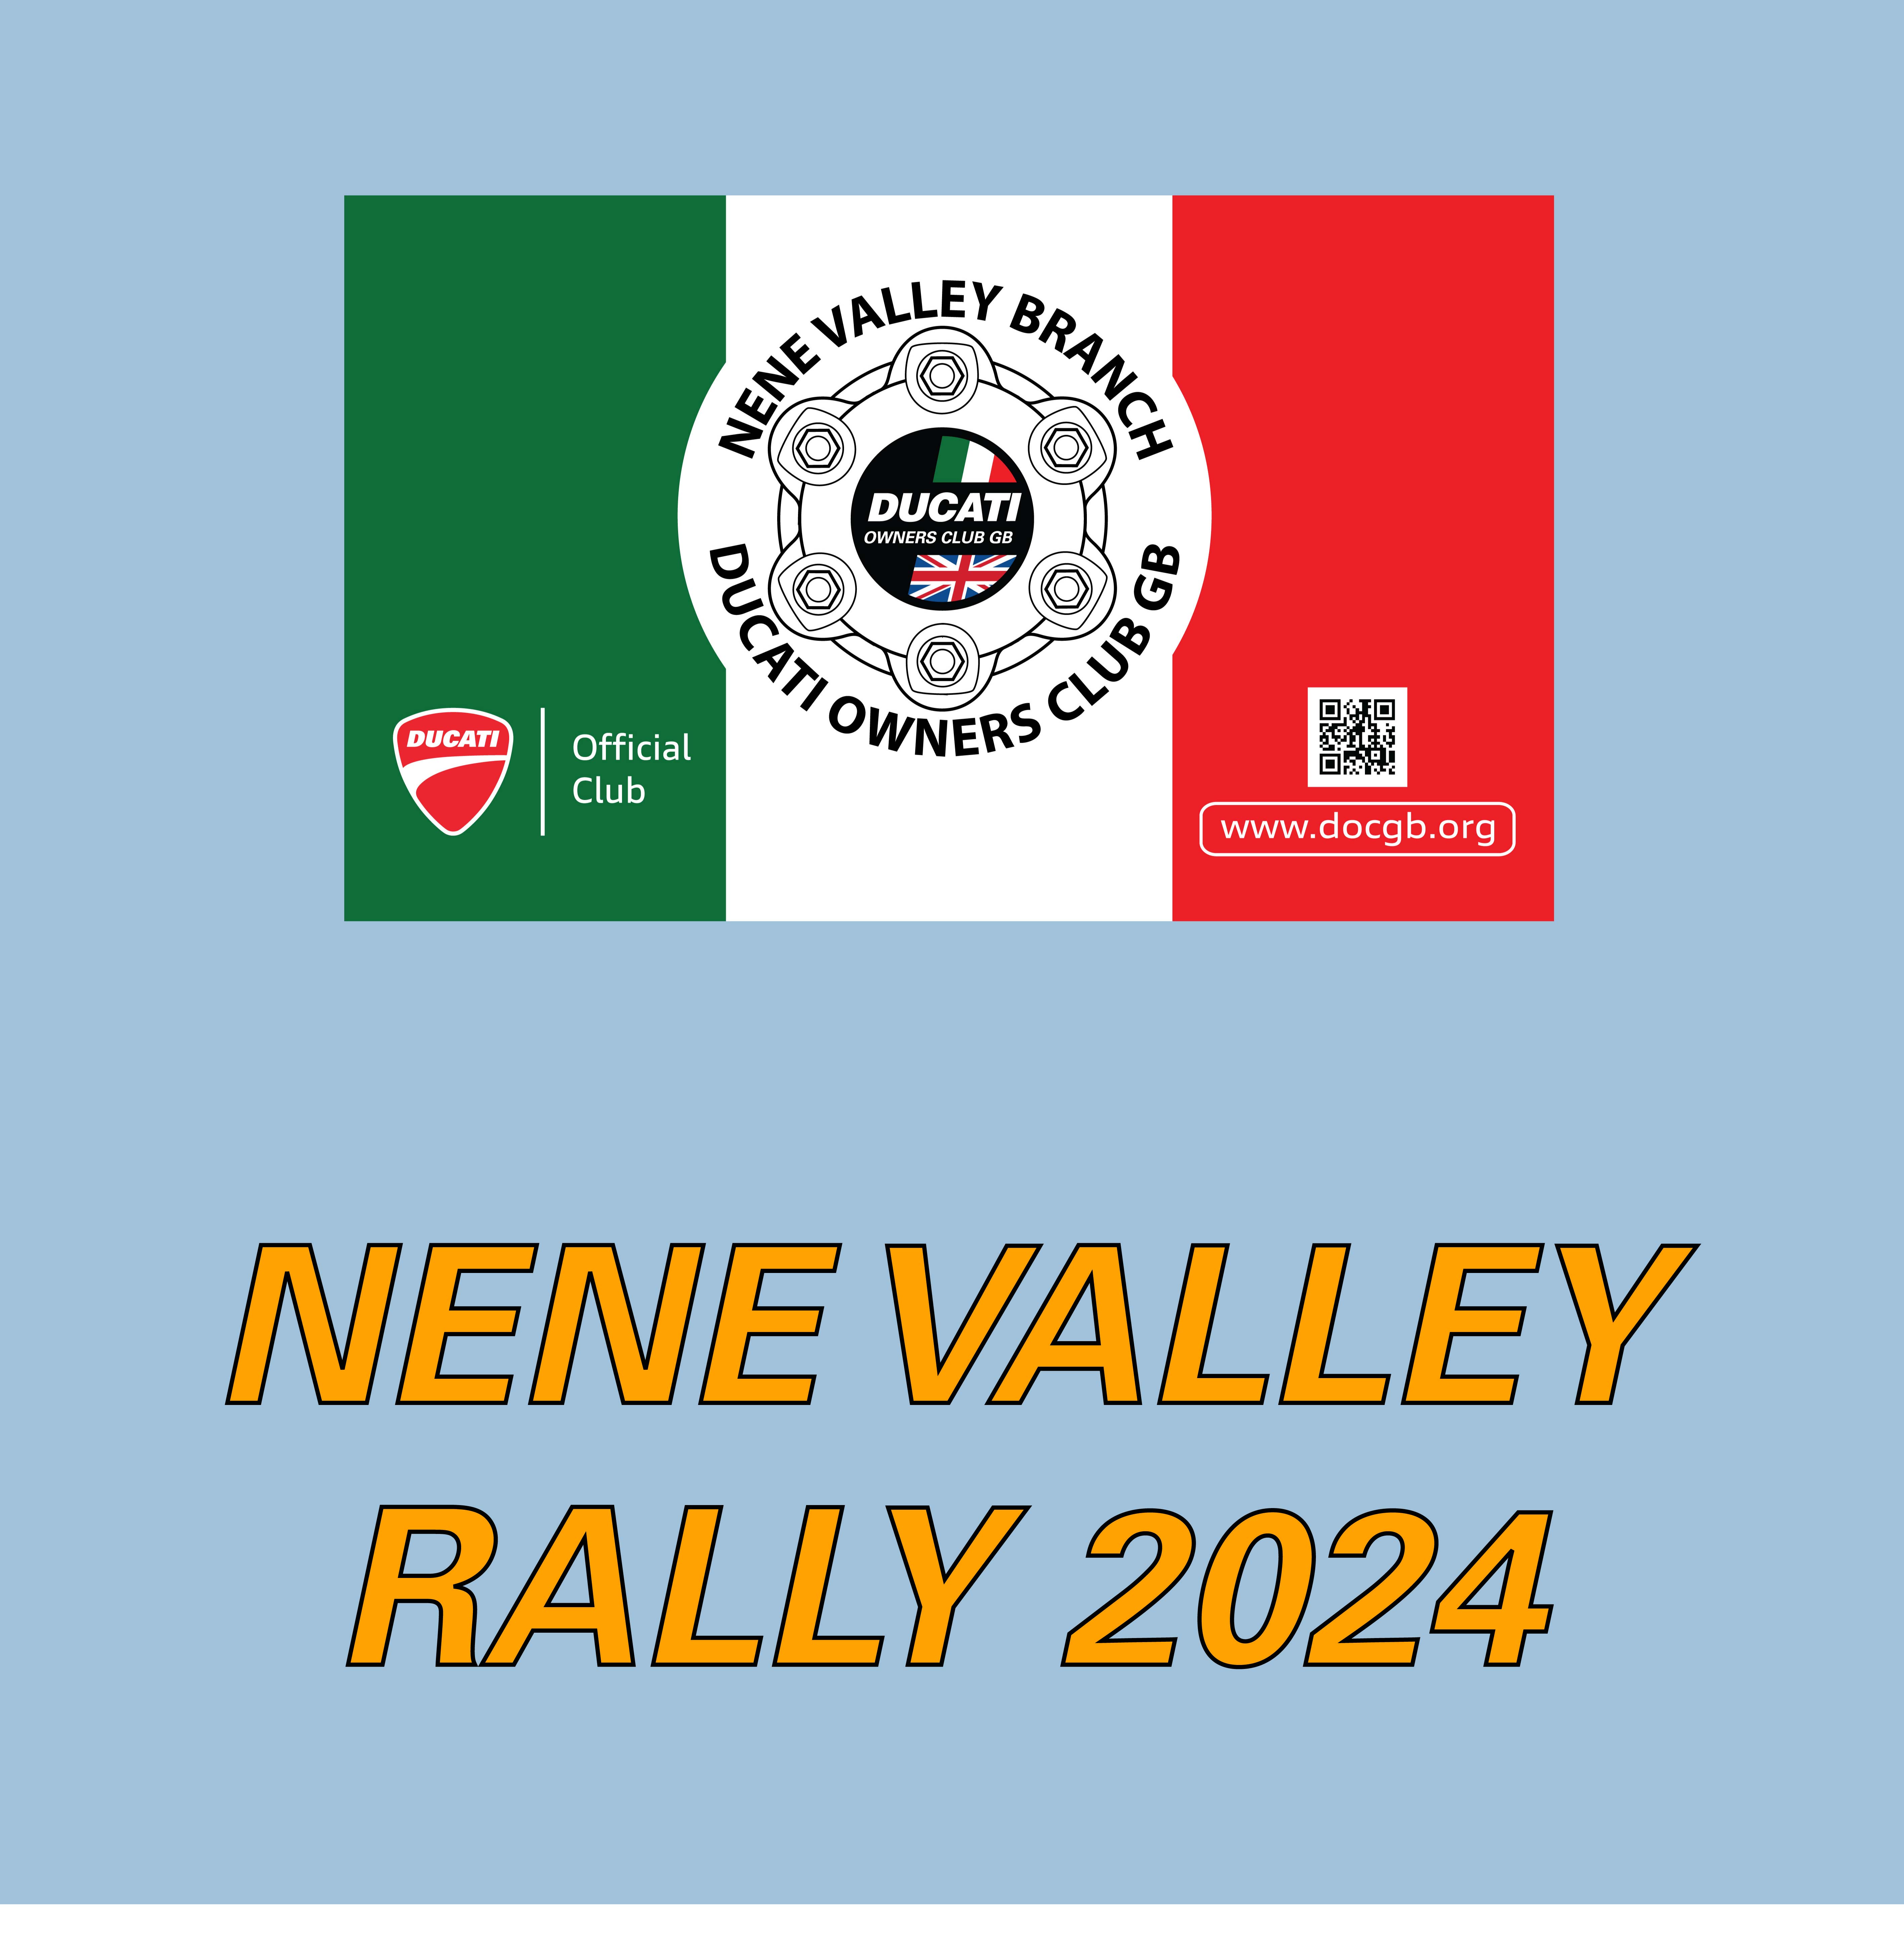 Ducati Roadshow coming to  the Club’s Nene Valley Rally in May 2024